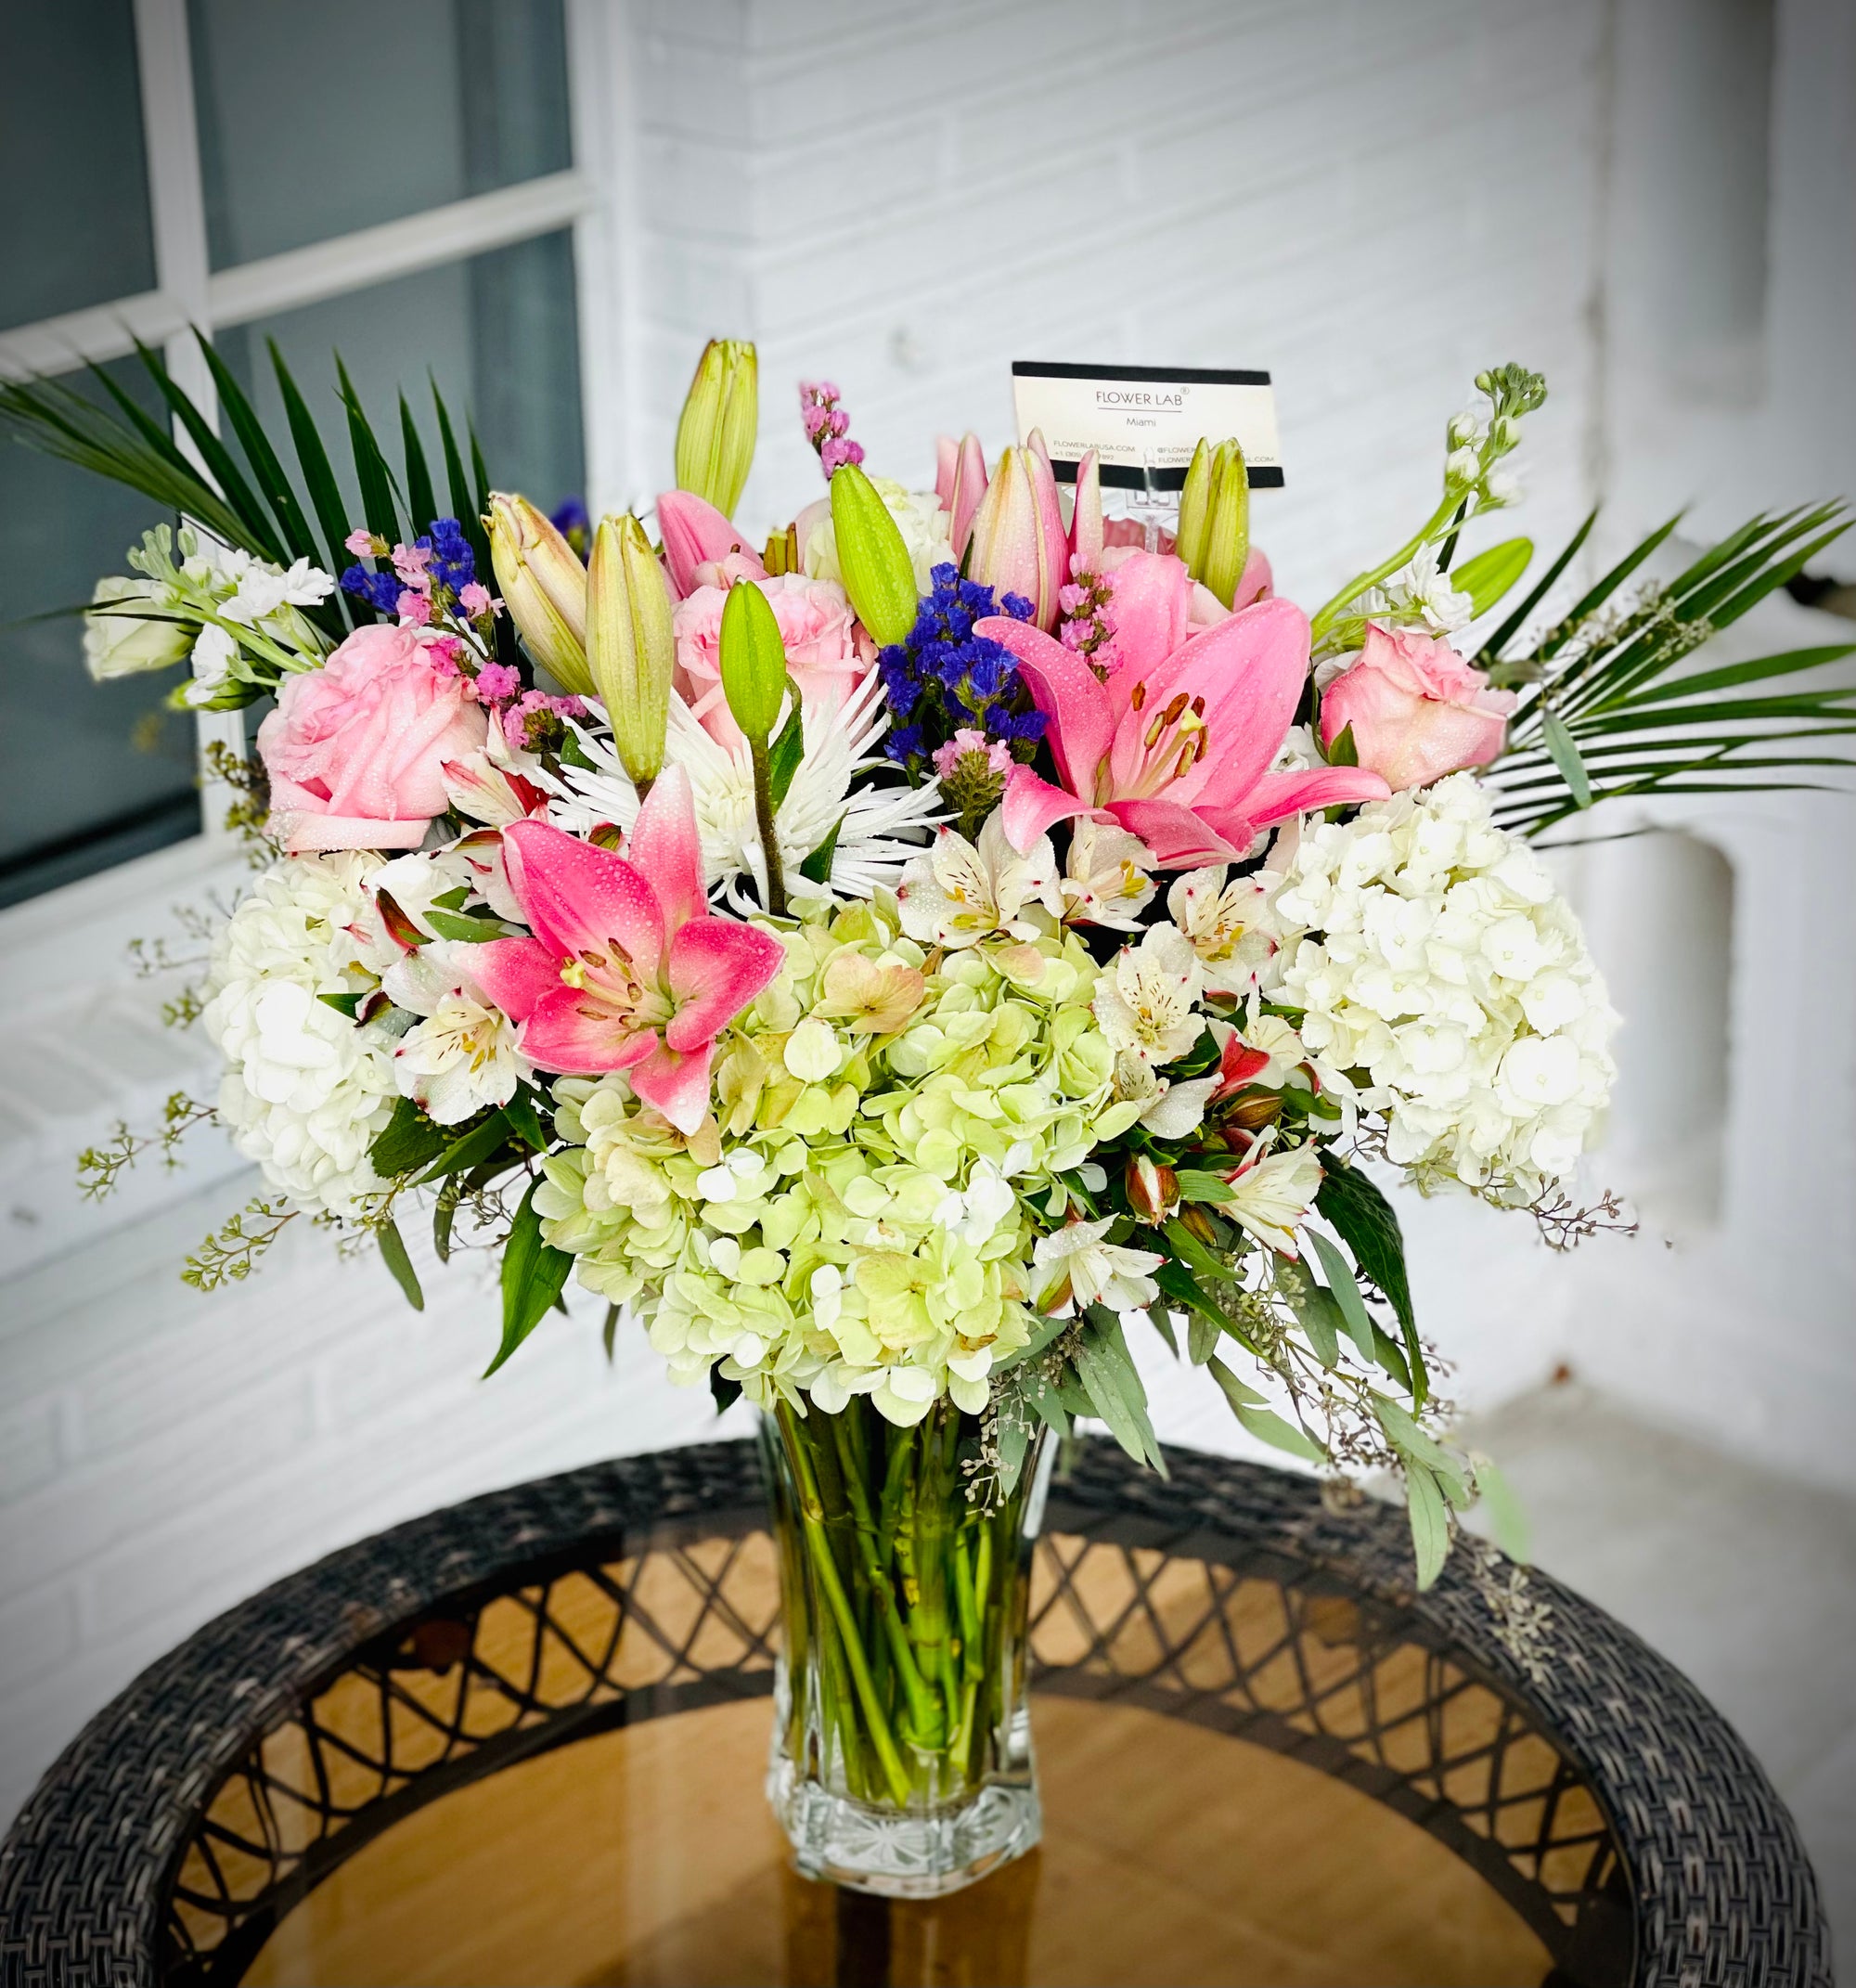 Lilies, hydrangeas, roses, lisianthus, and more